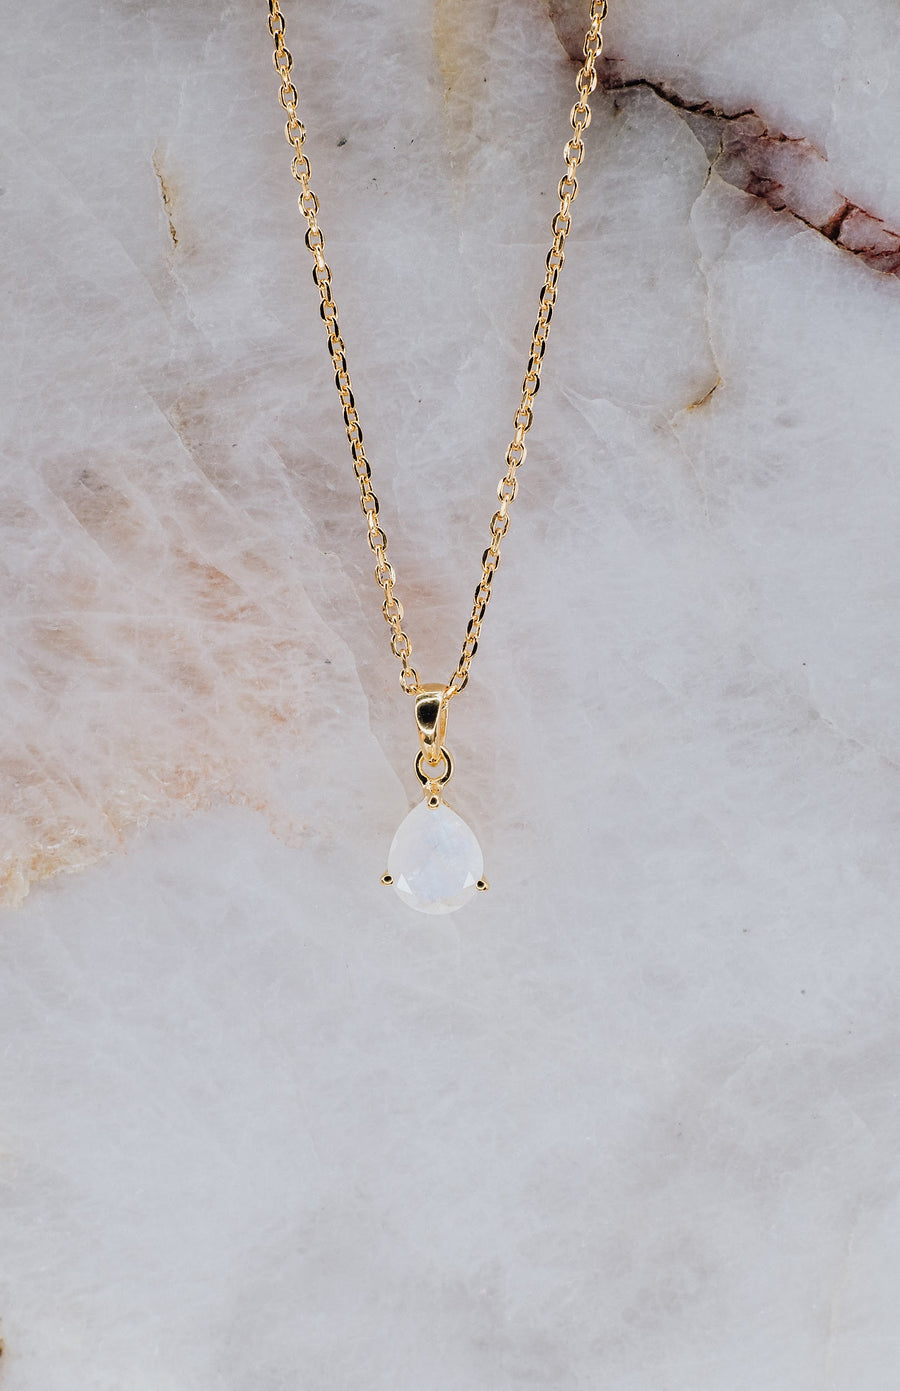 Teardrop moonstone necklace gold plated